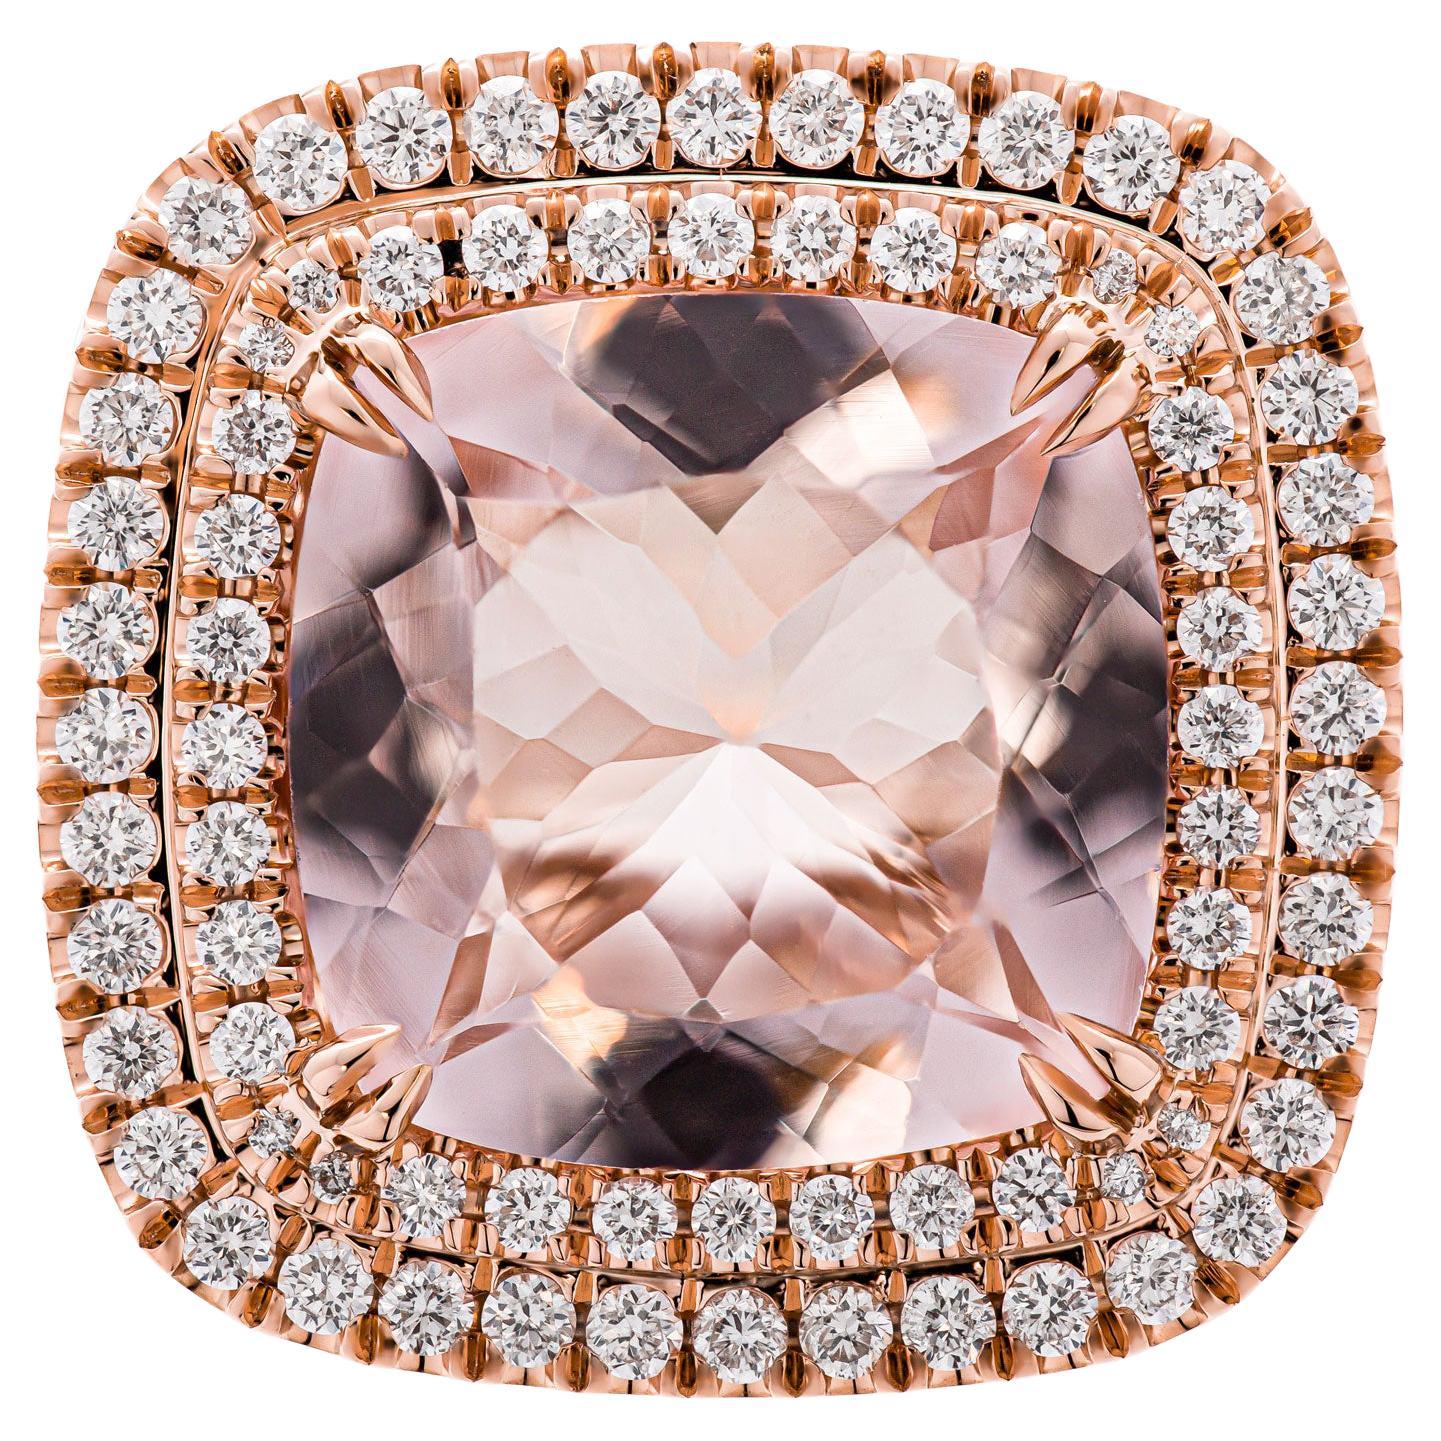 Cocktail Ring in 14K Rose Gold;
Featuring Double halo around 6.75ct Morganite
 Diamond cathedral shank & diamond stems totaling 1.55ct of white full brilliant cut diamonds
Size: 7 (sizable)
Comes with box, Appraisal available upon request
Retail